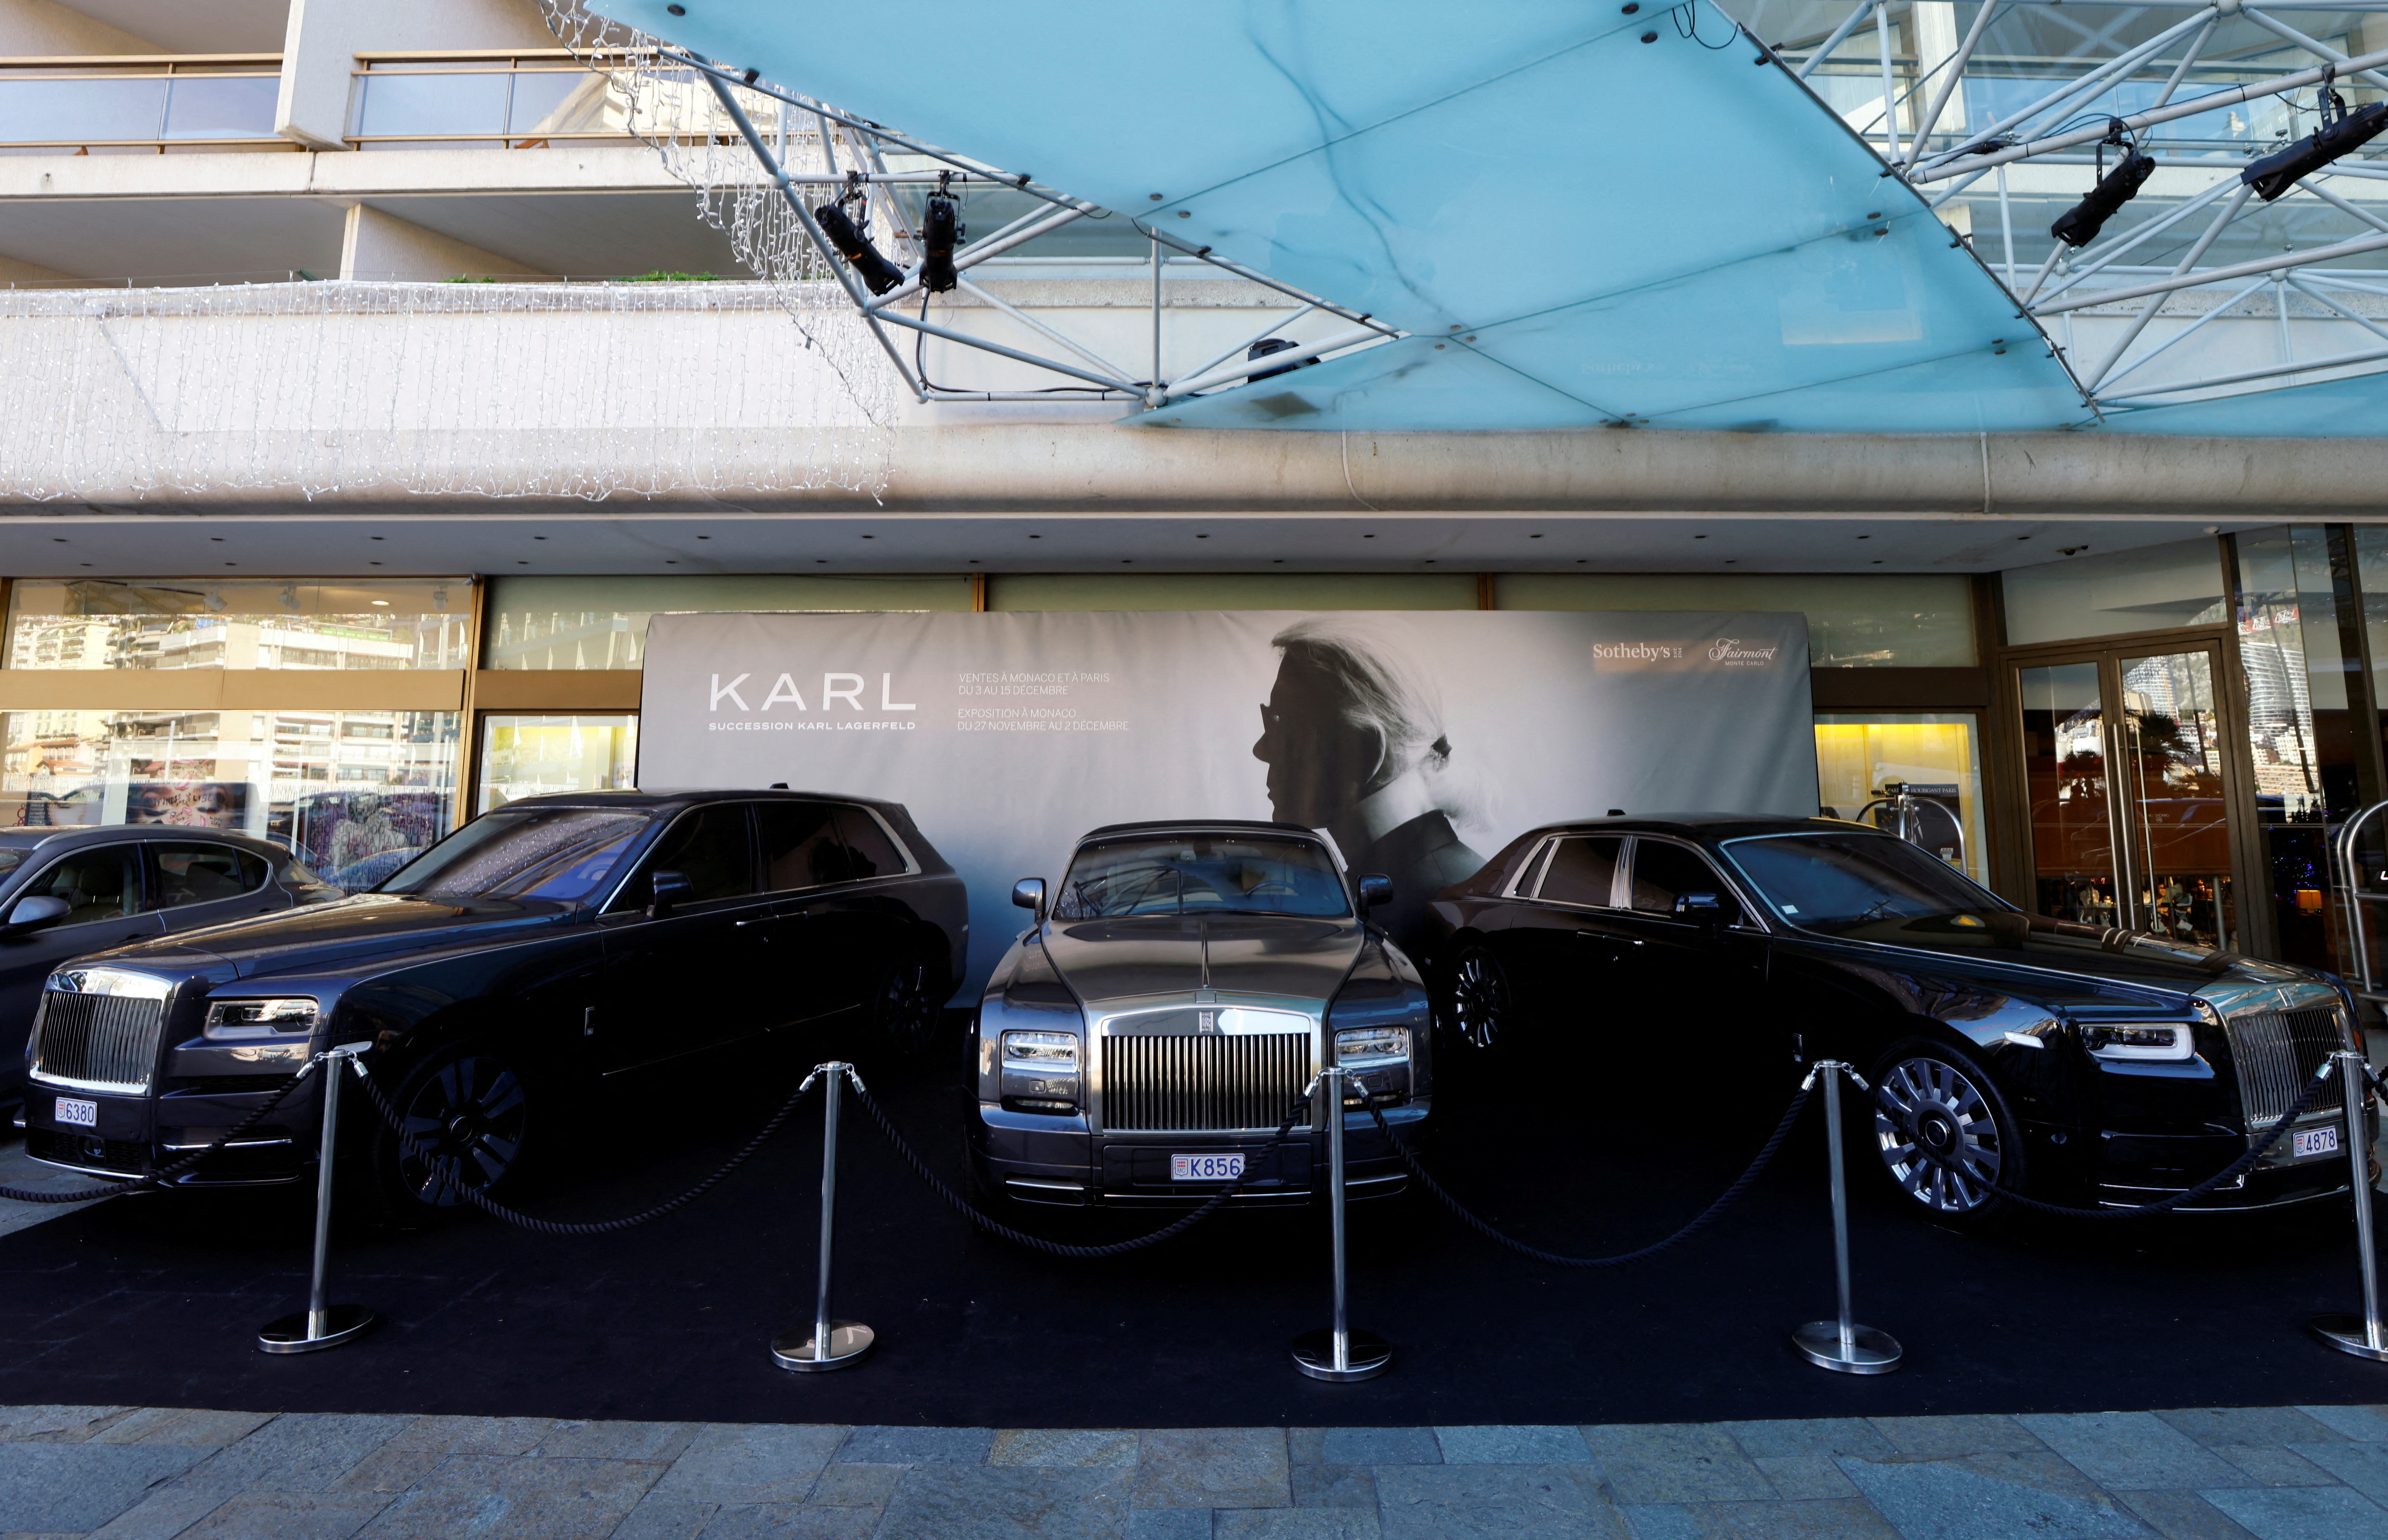 Three Rolls-Royce cars owned by late fashion designer Karl Lagerfeld are displayed before the auction of Karl Lagerfeld’s Collection by Sotheby's auction house in Monte-Carlo, Monaco, November 30, 2021. REUTERS/Eric Gaillard